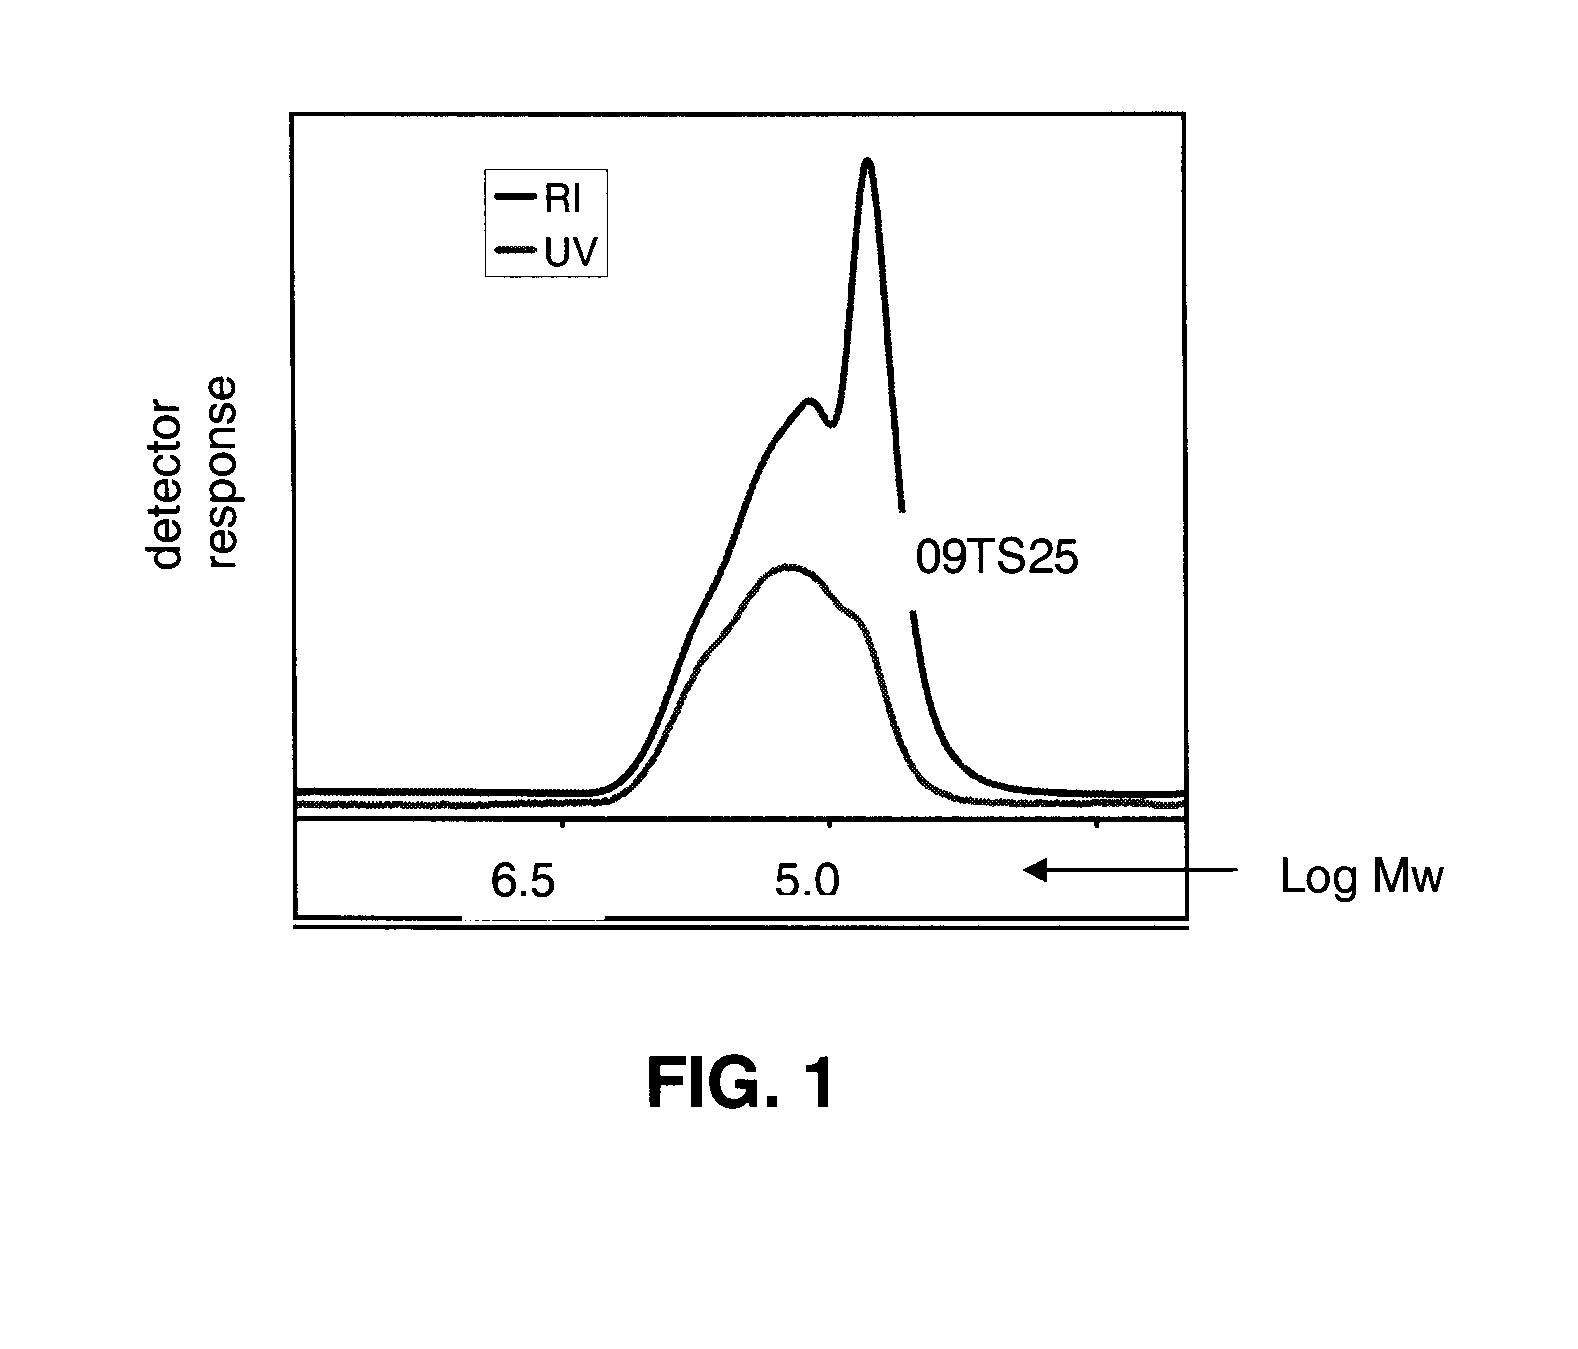 Arborescent polymers having a core with a high glass transition temperature and process for making same